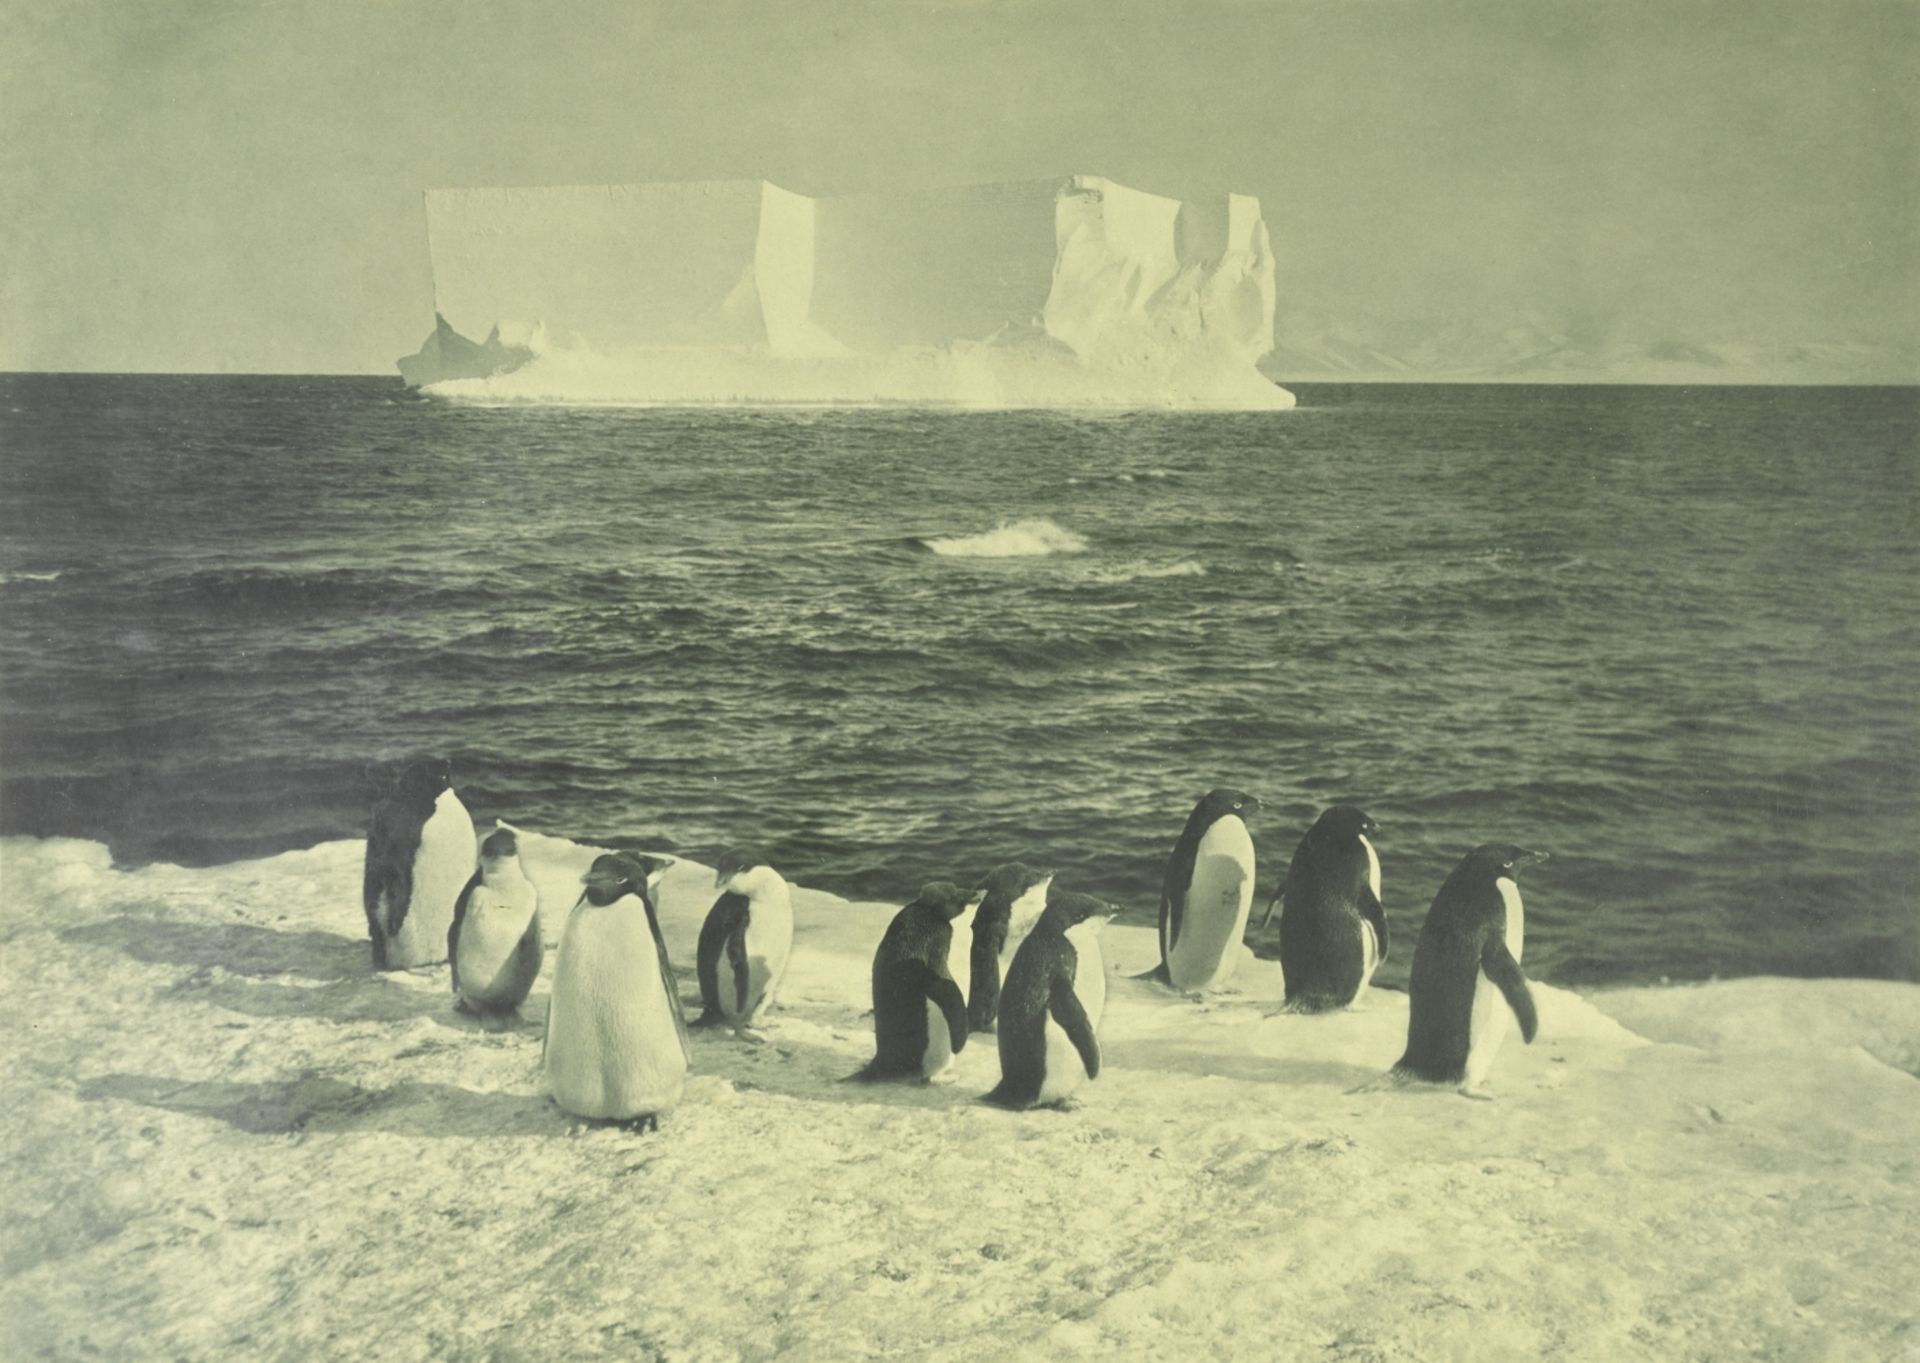 PONTING (HERBERT GEORGE) 'An Iceberg off Cape Royds', SIGNED BY THE PHOTOGRAPHER ('H.G. Ponting')...